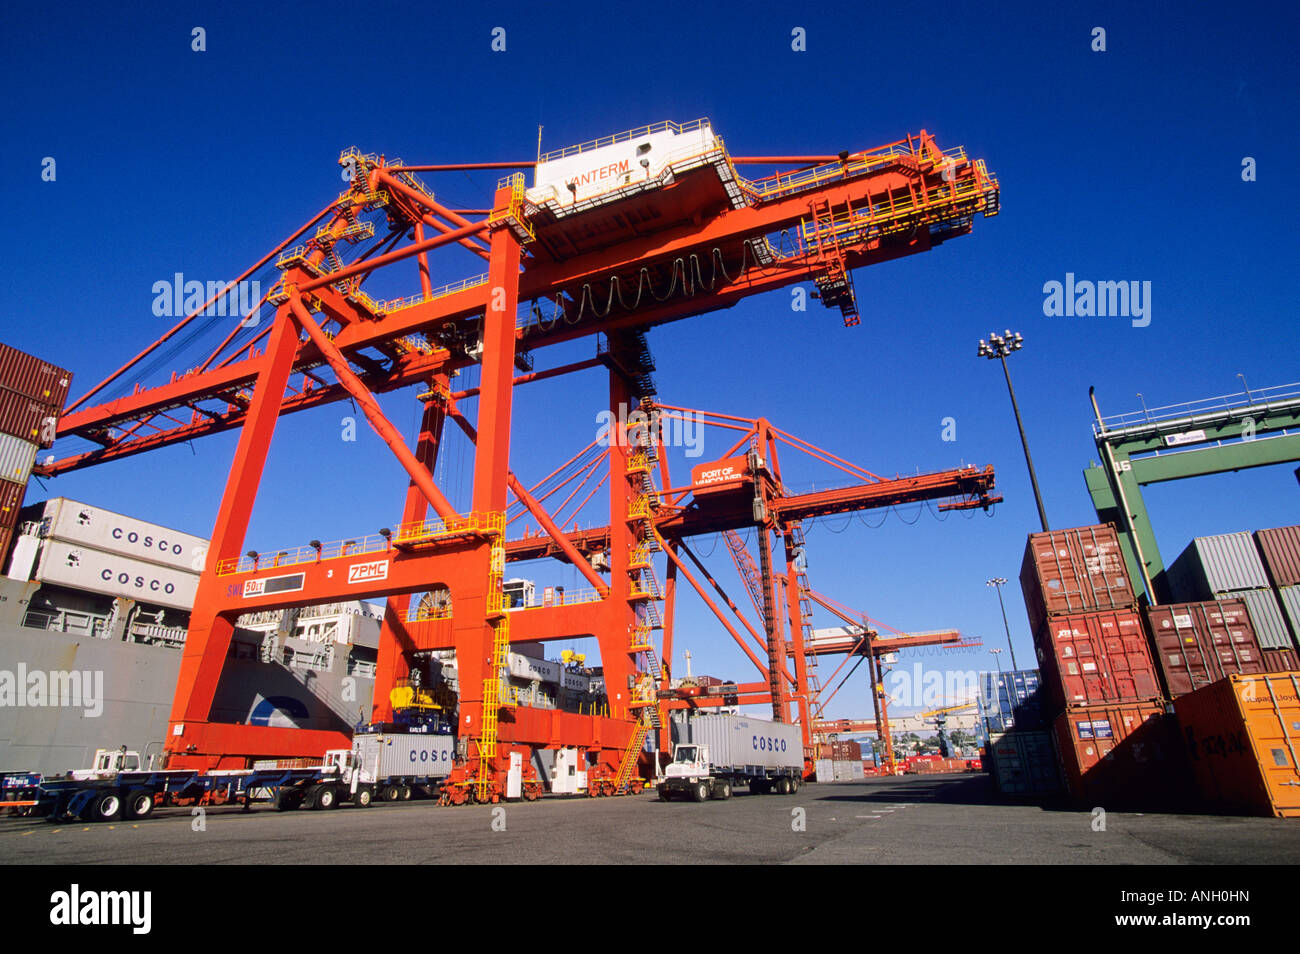 Terminal, Dock crane unloading a container ship, Port of Vancouver, British Columbia, Canada. Stock Photo